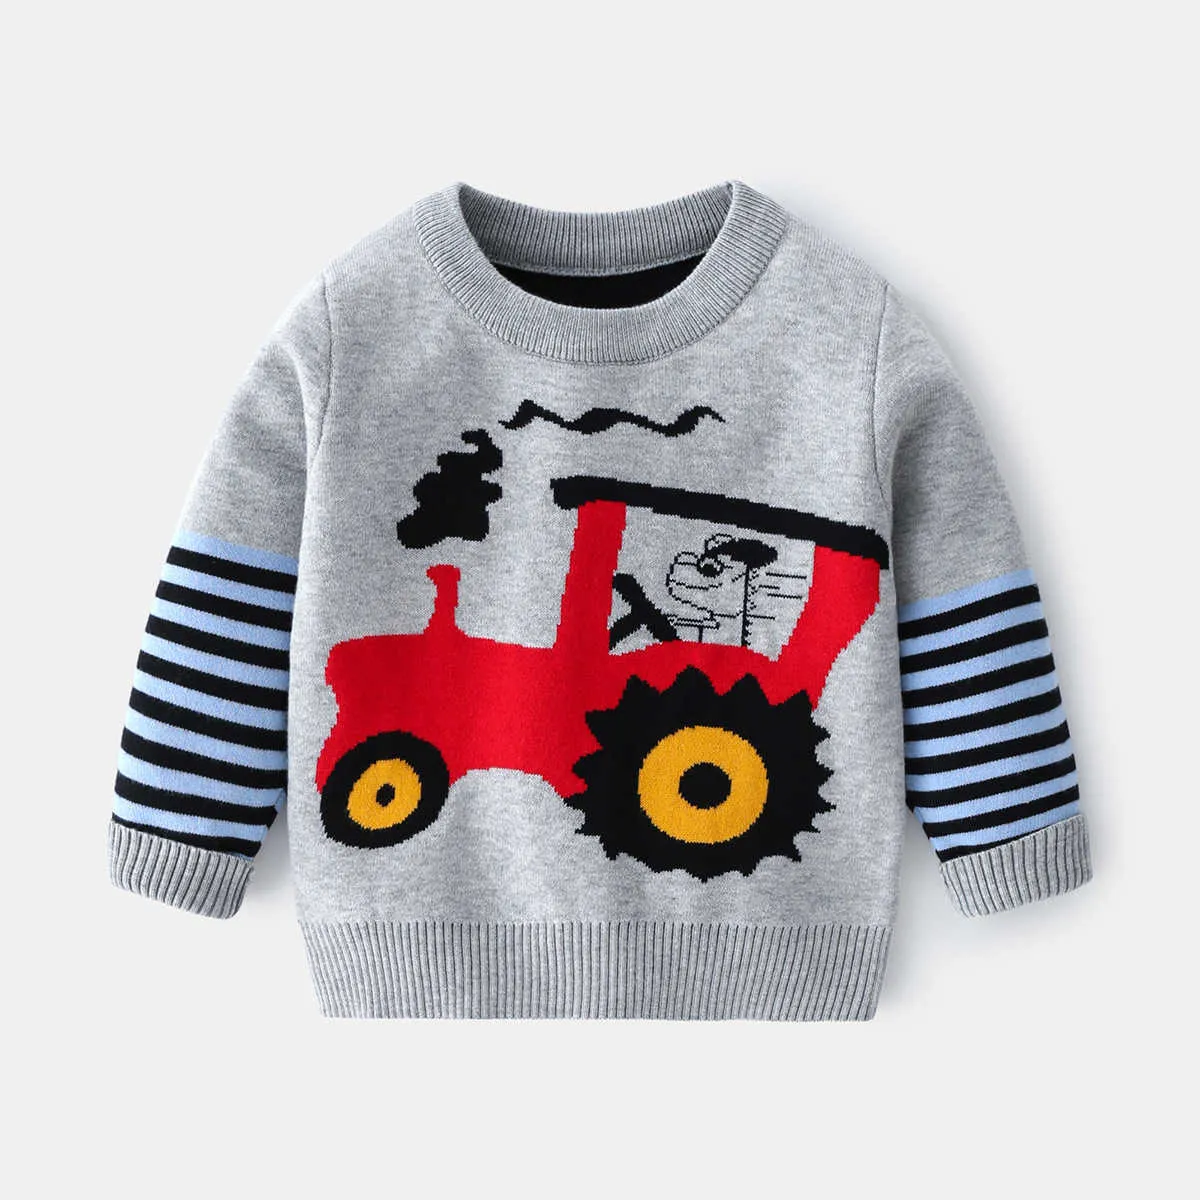 Sweater Casual Pullover Crew Neck Childrens Long Sleeve Girls Baby Sweater Spring Autumn Boys Cartoon Printed Cotton Clothes Y1024